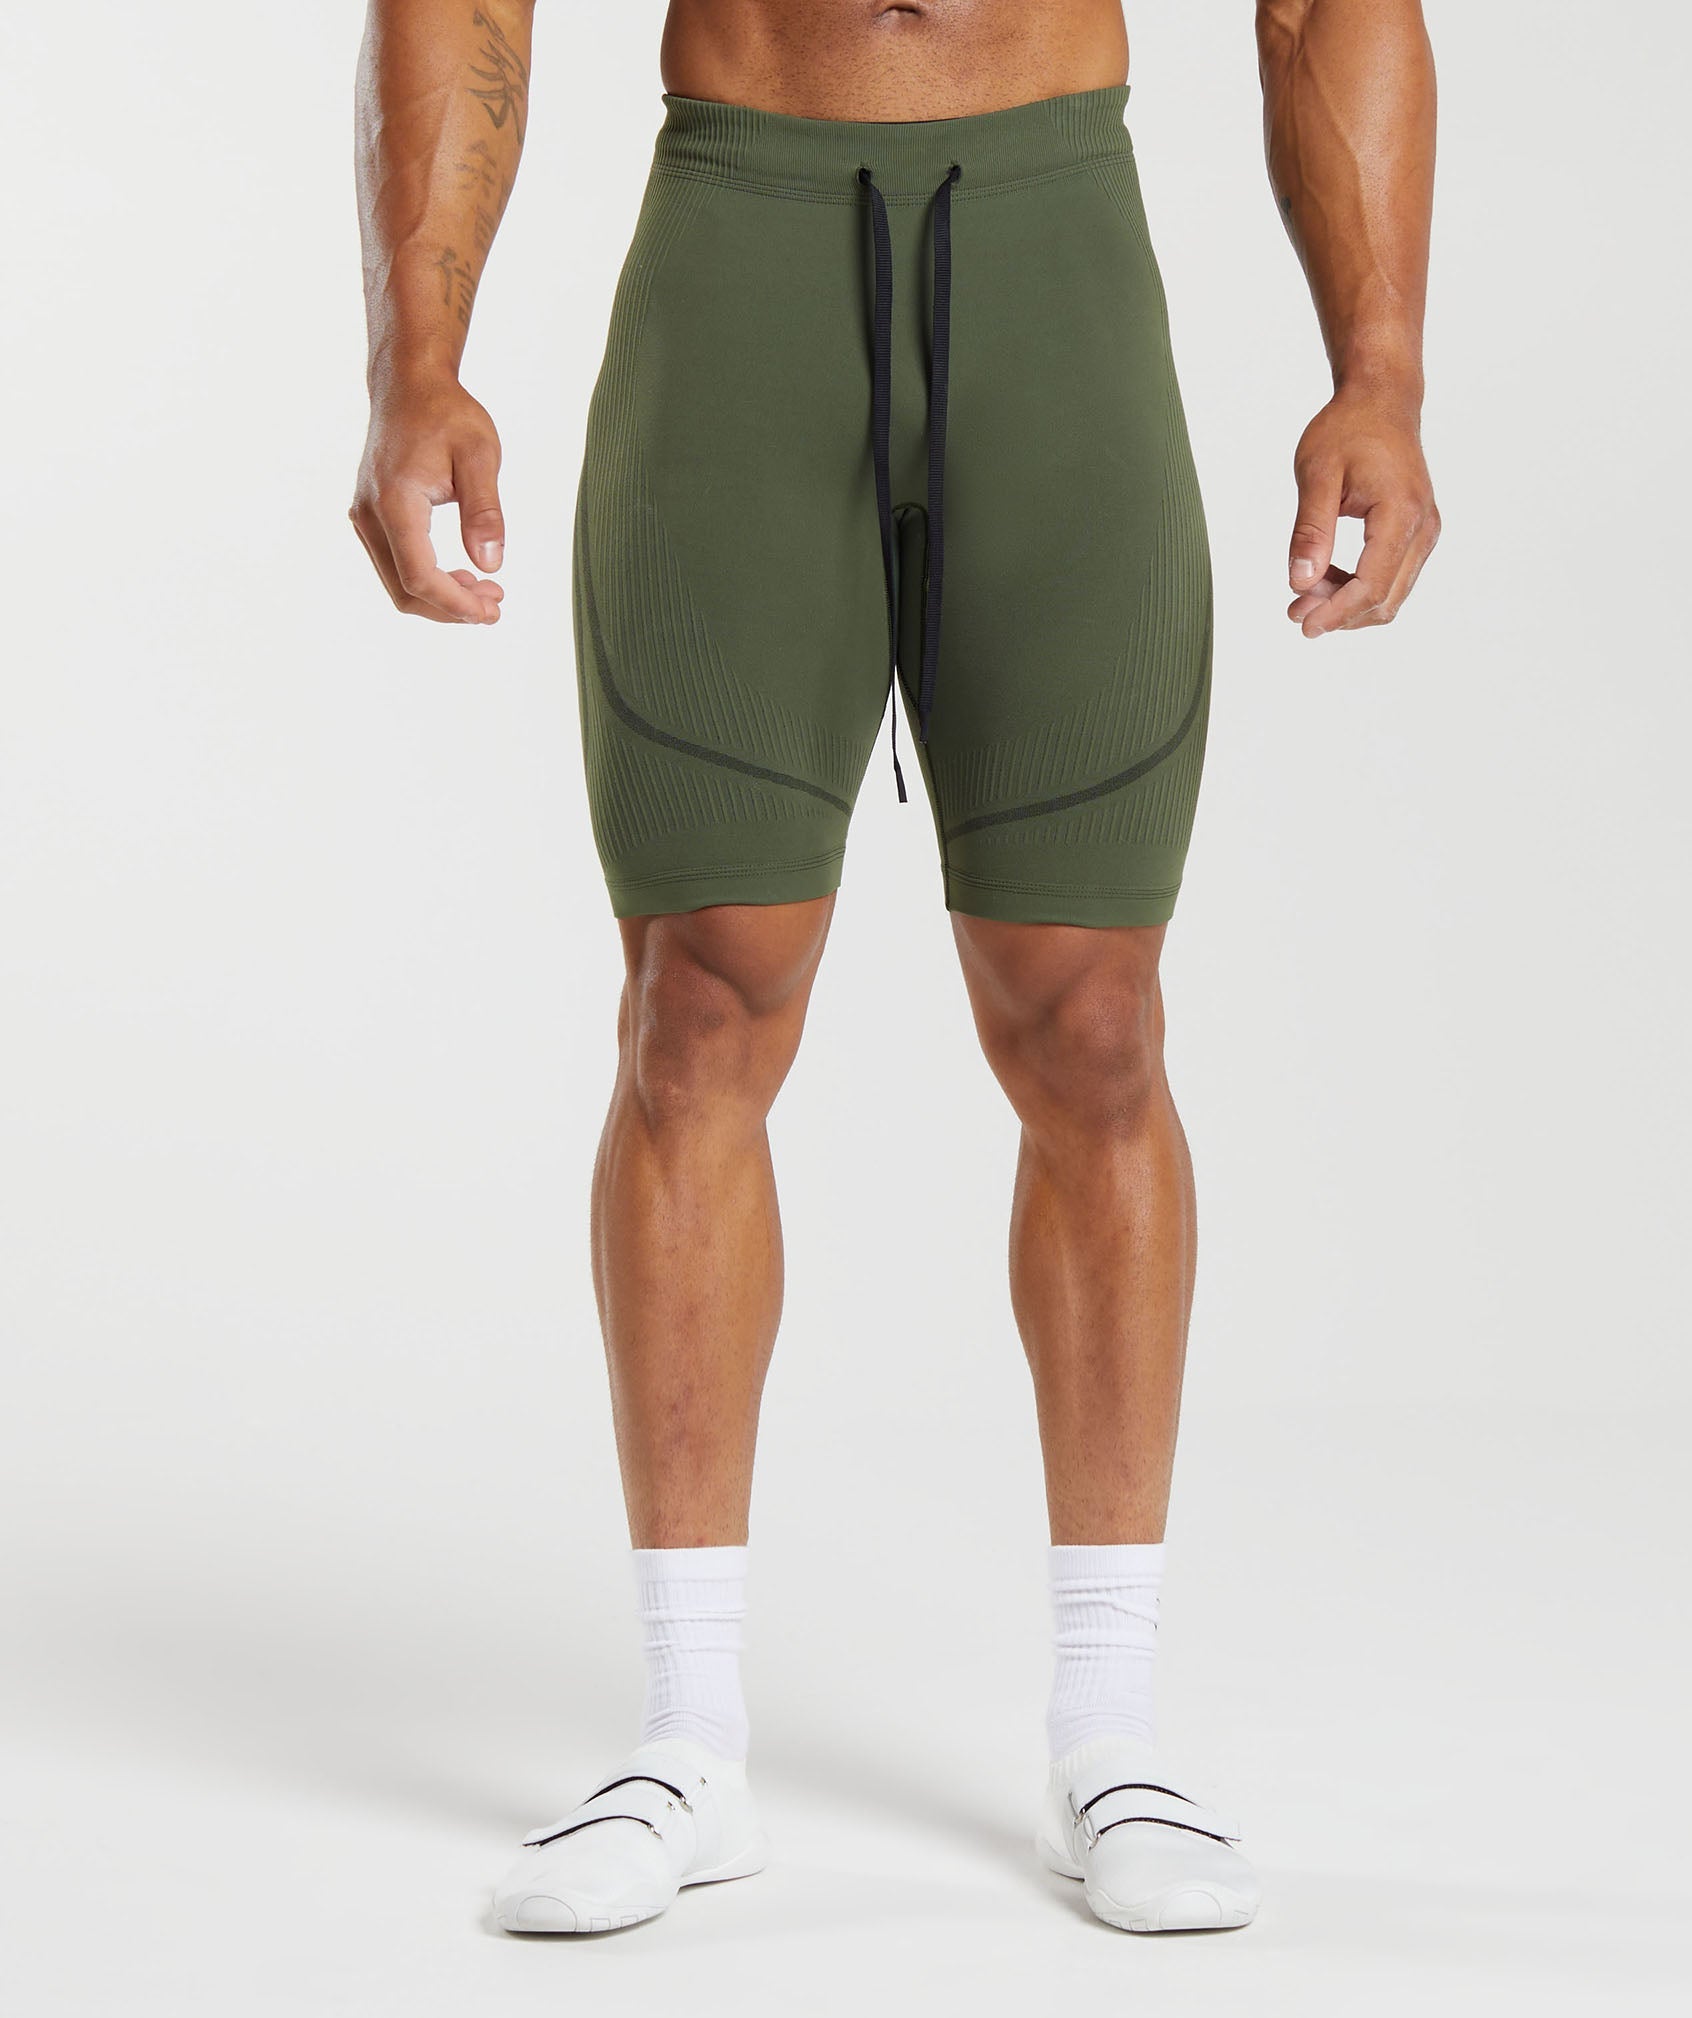 315 Seamless Shorts in Winter Olive/Black